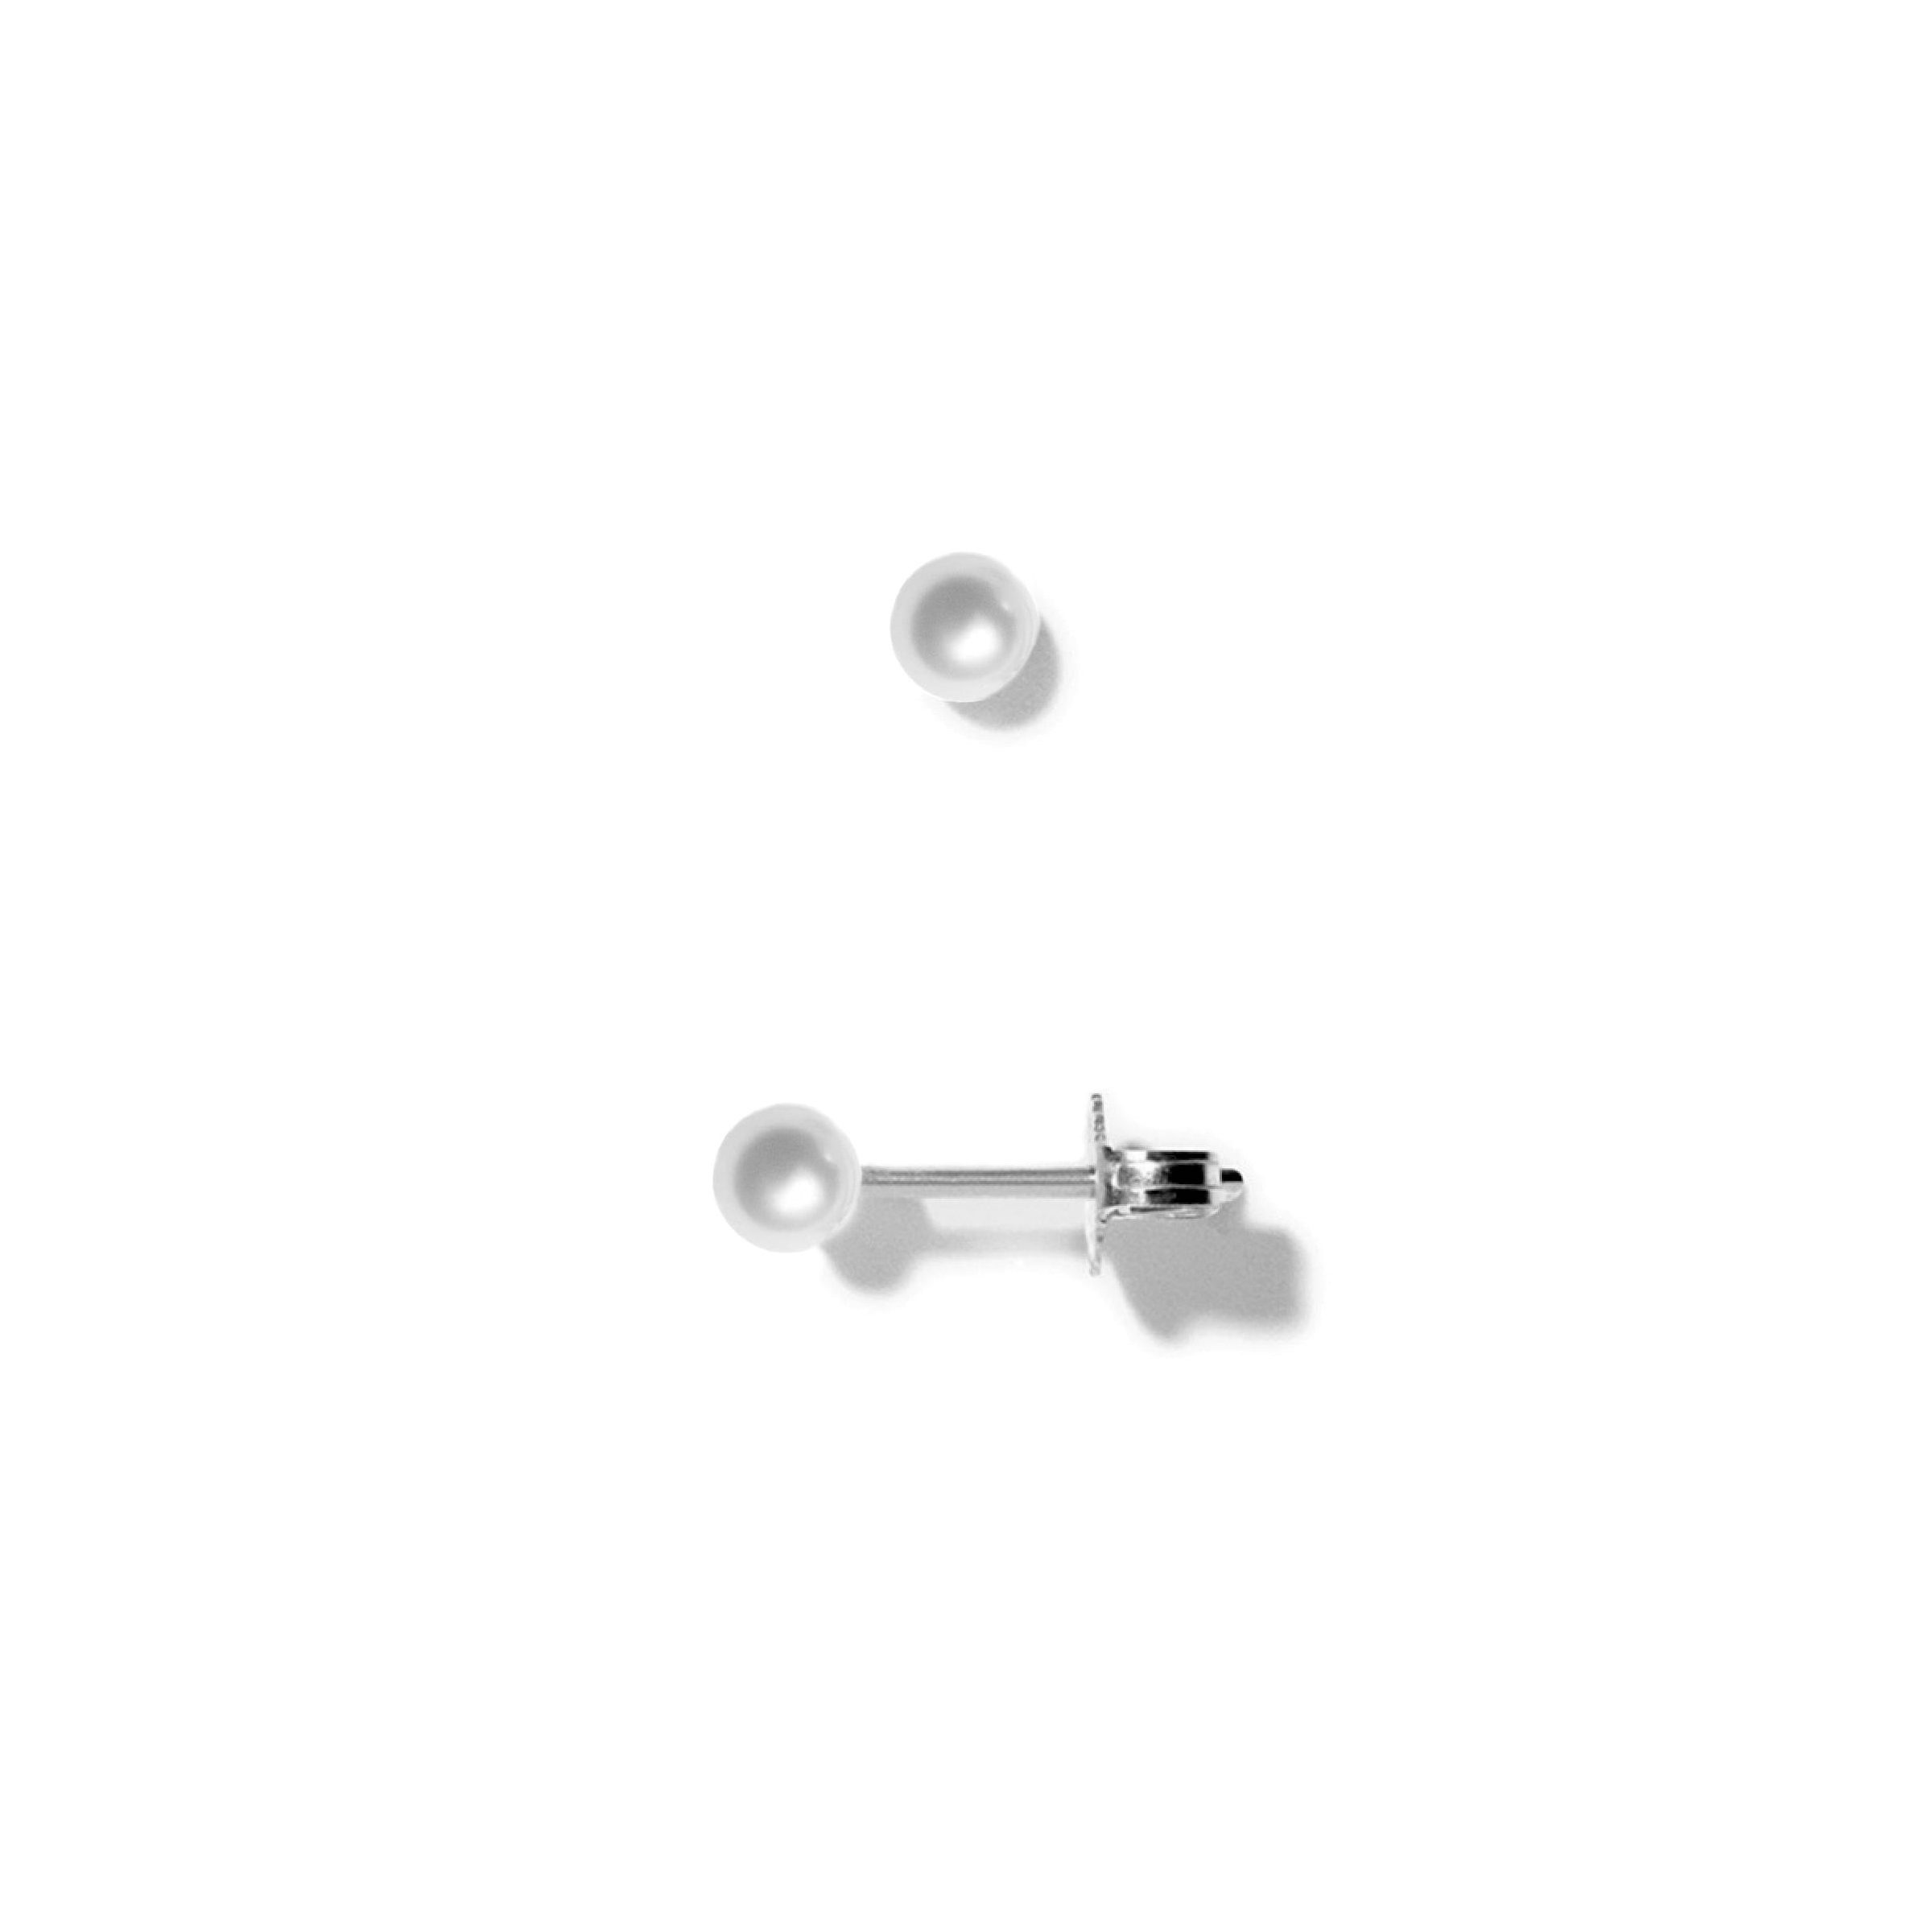 Line & Jo pearl earring Ear Two in high polished sterling silver with white pearl ear stud